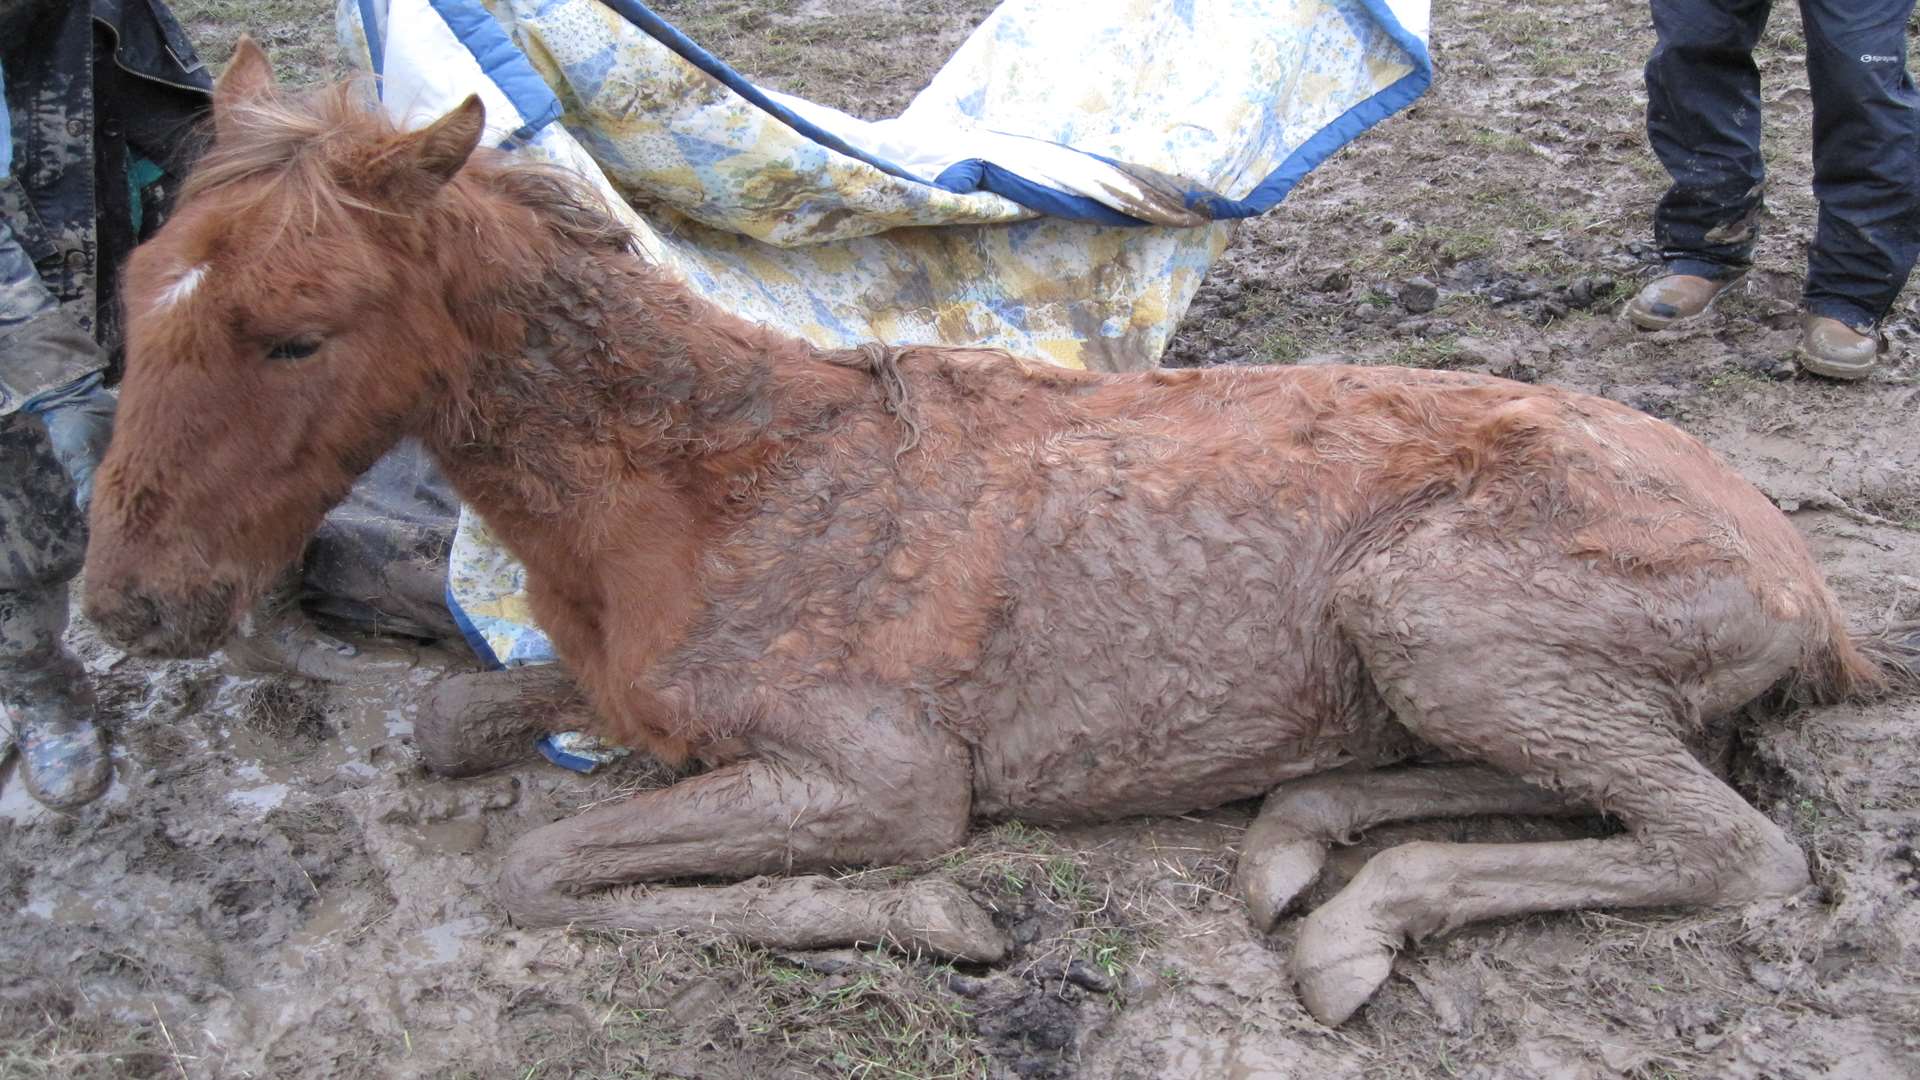 The colt was put down as it was too sickly to be saved